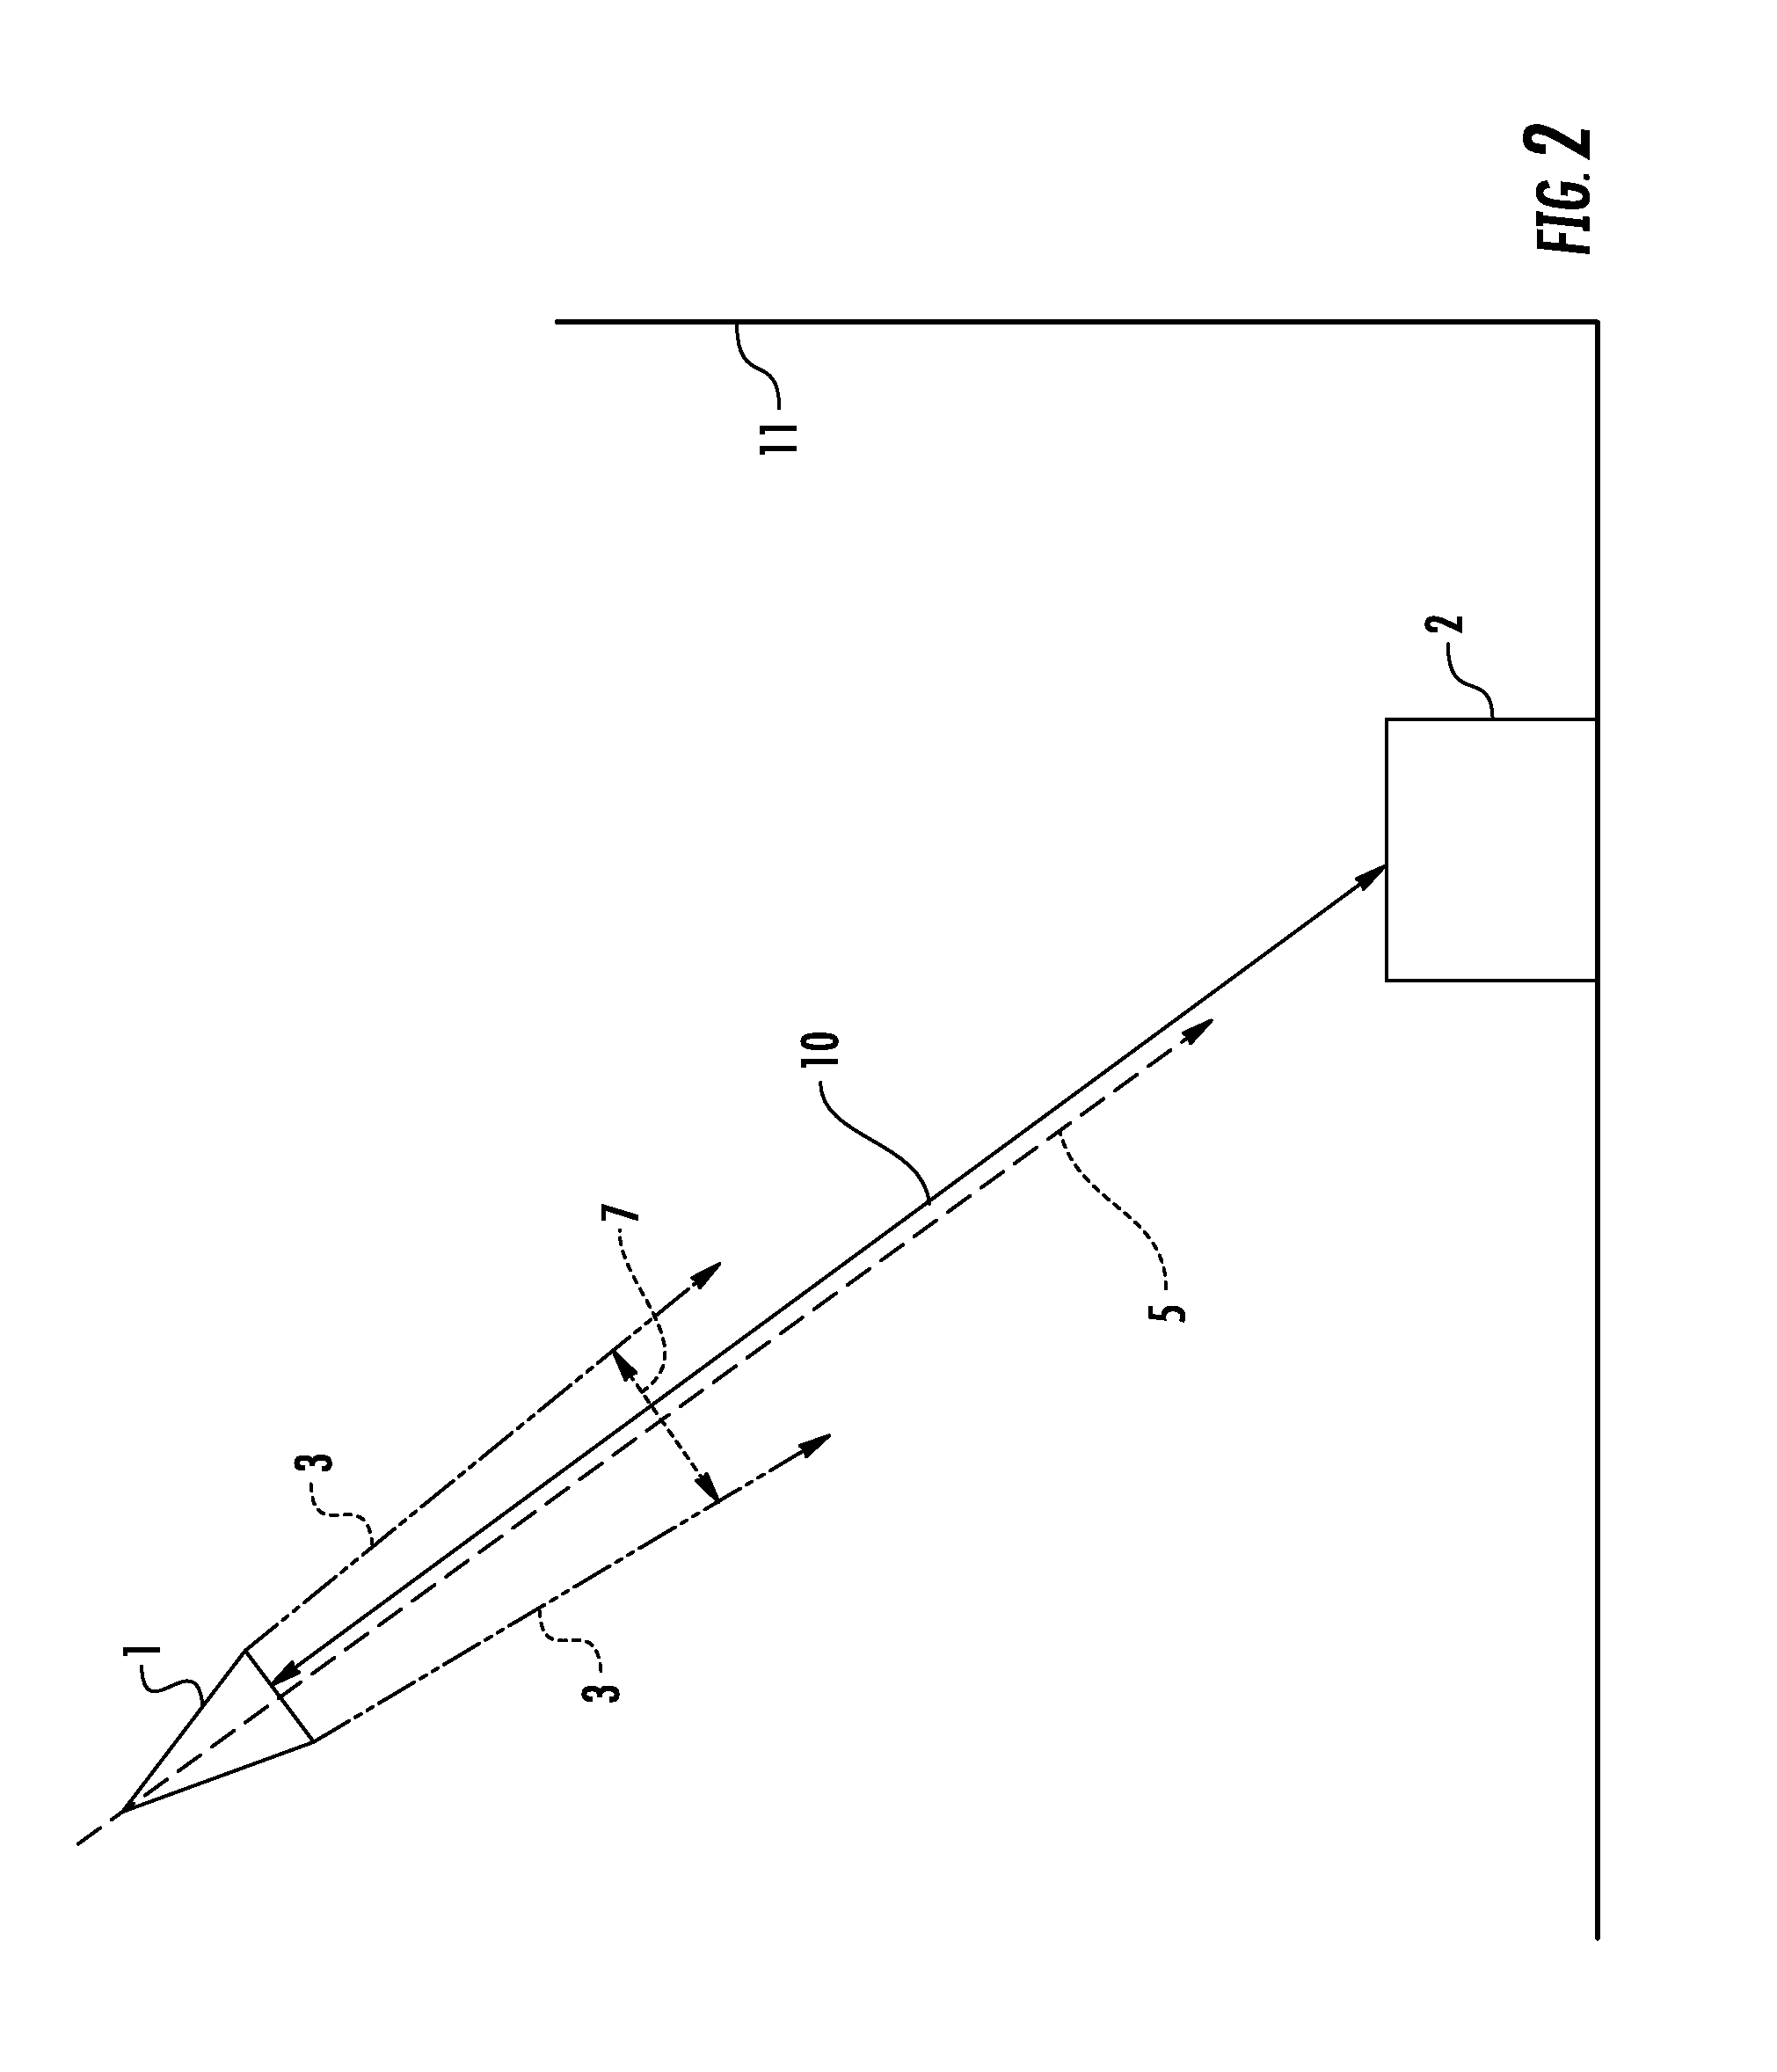 Dimensioning system with multipath interference mitigation